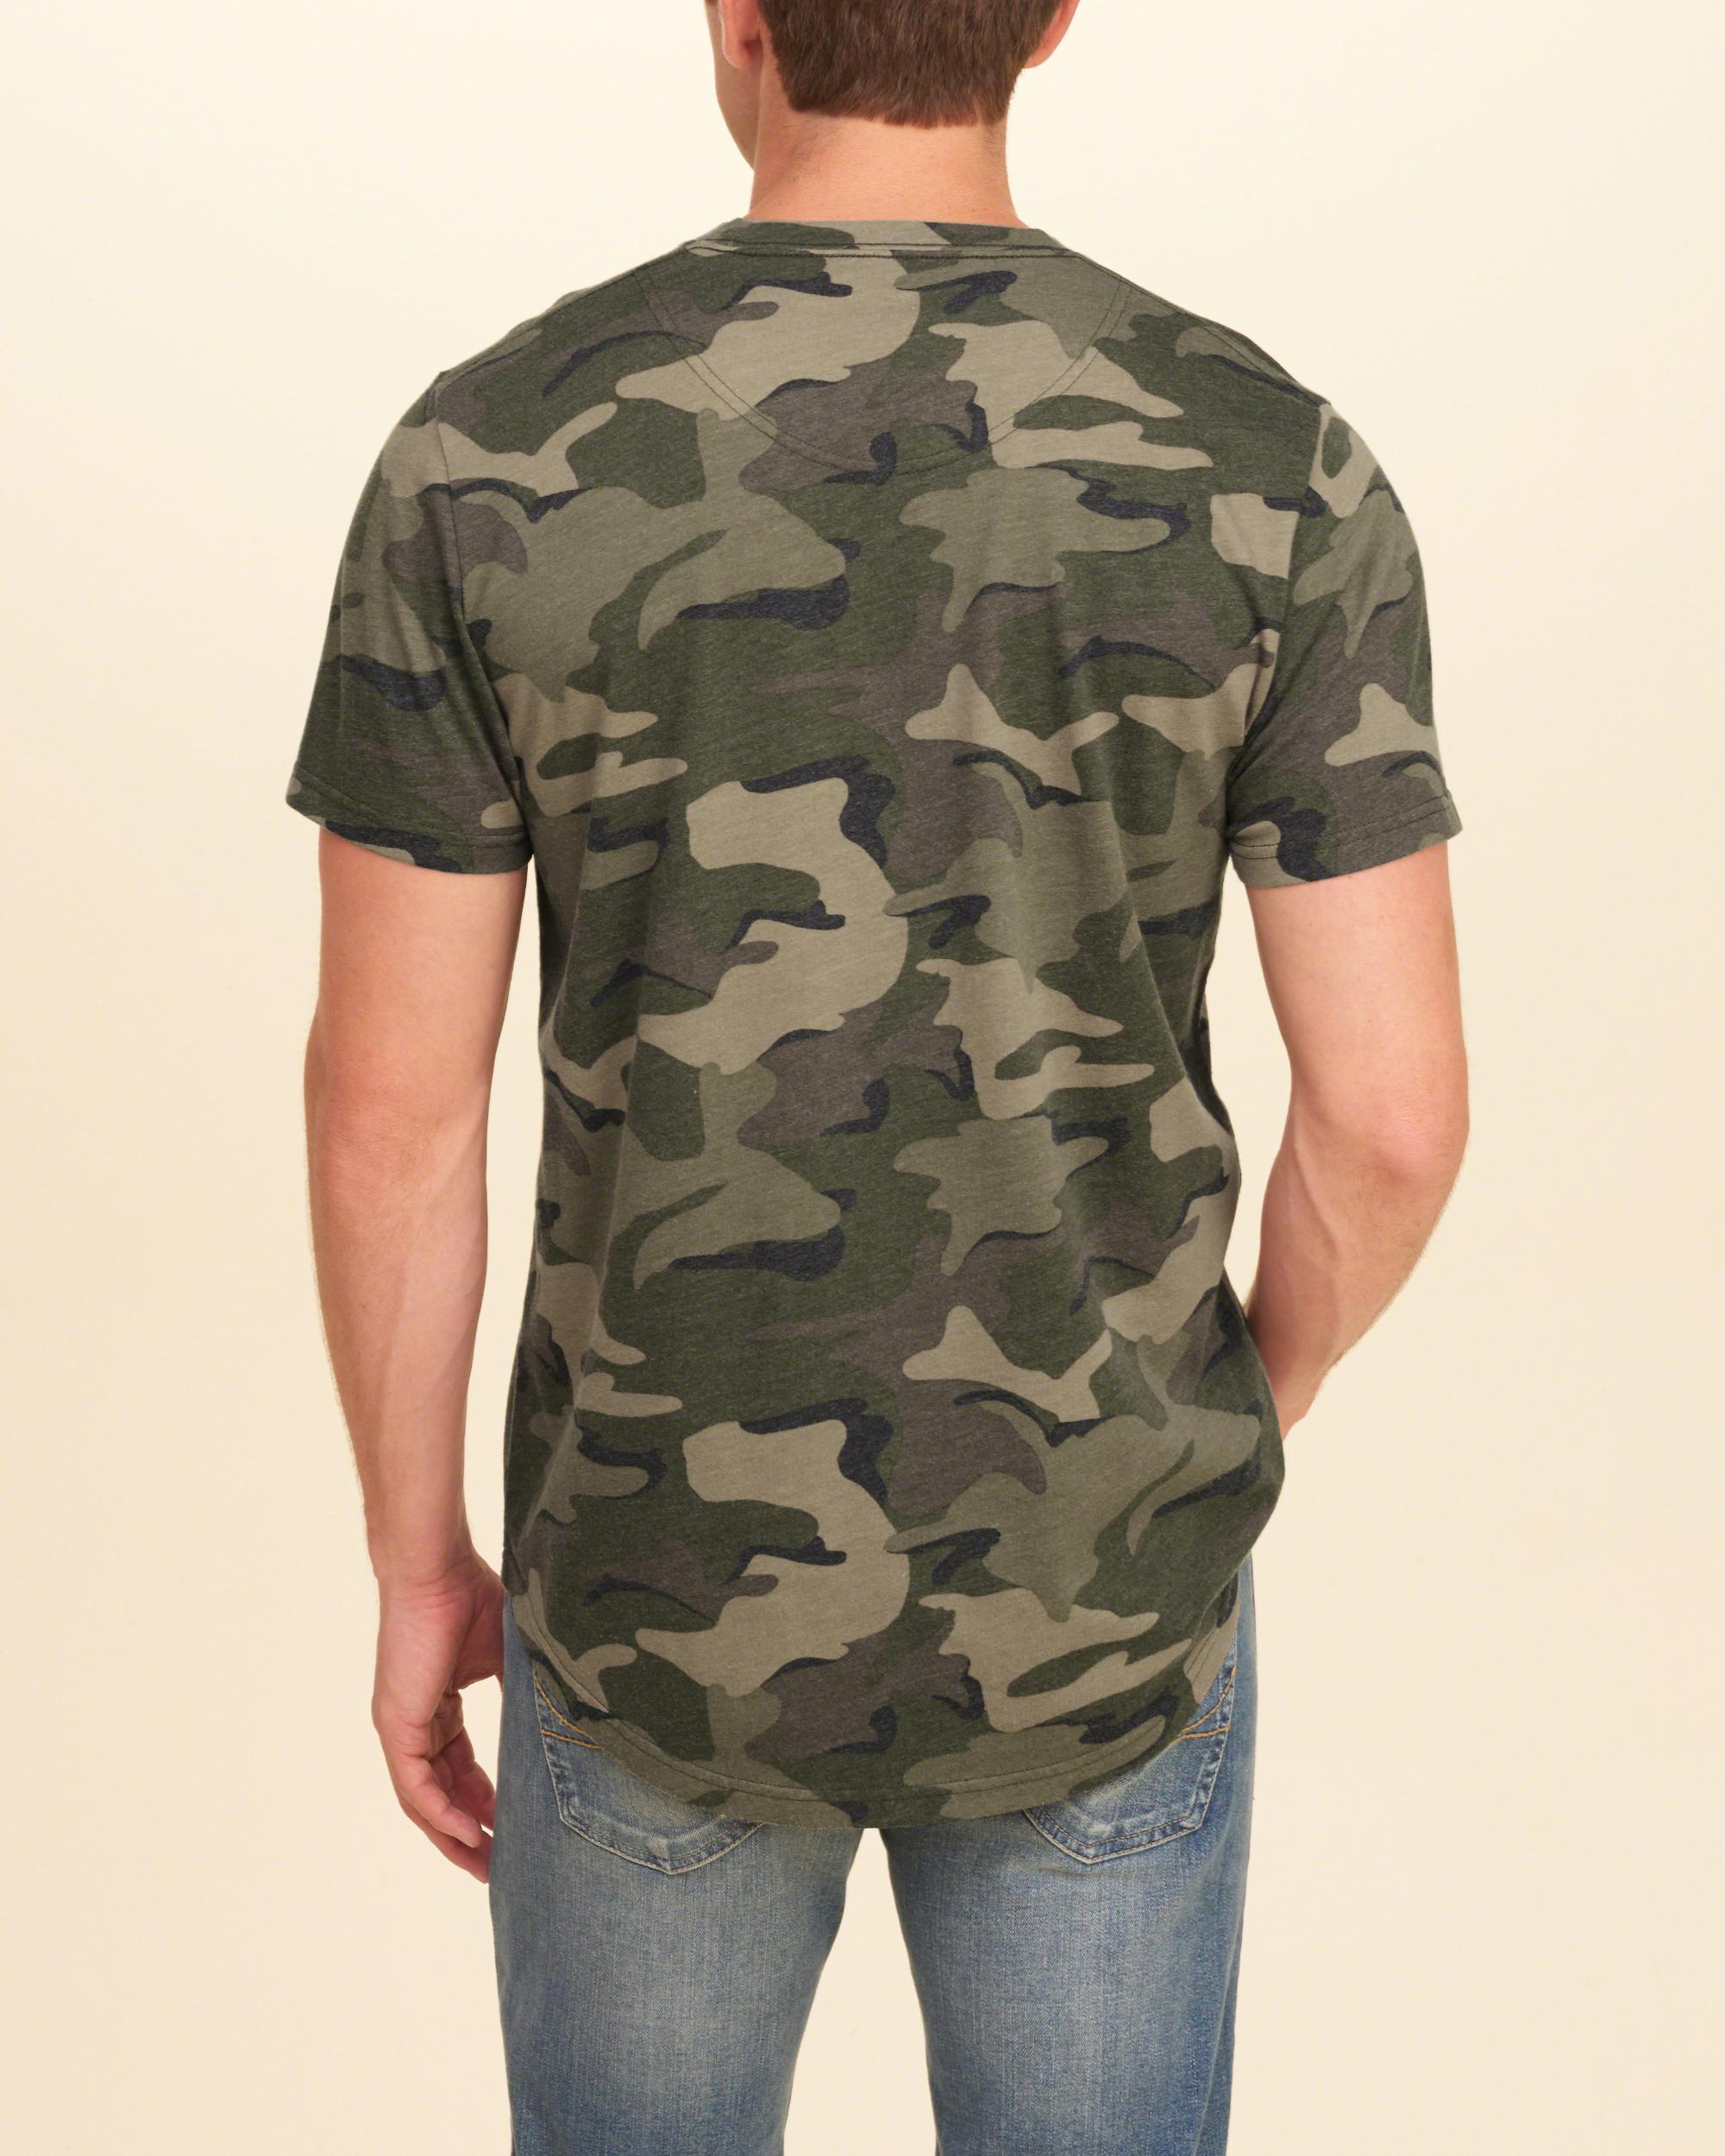 Lyst - Hollister Camo Graphic Tee in Green for Men